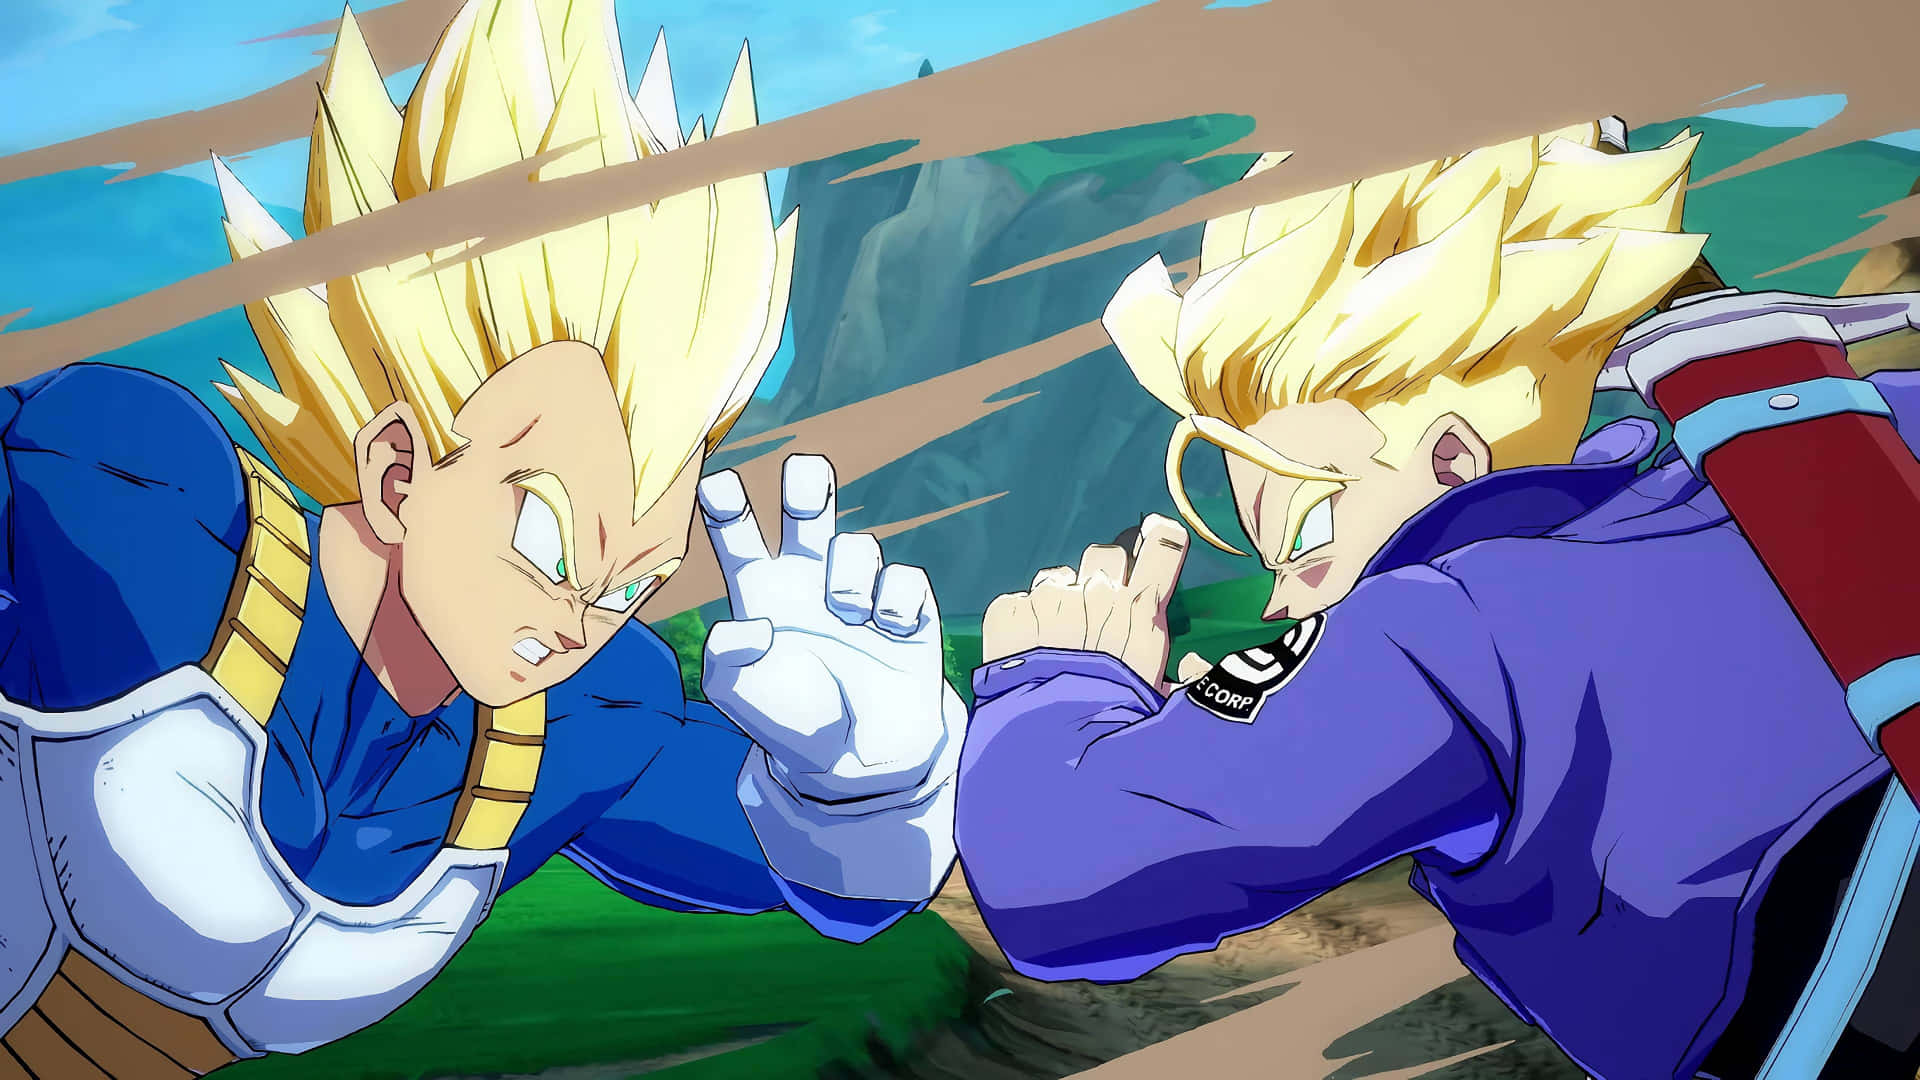 Download Vegeta And Trunks In Action Wallpaper 9760